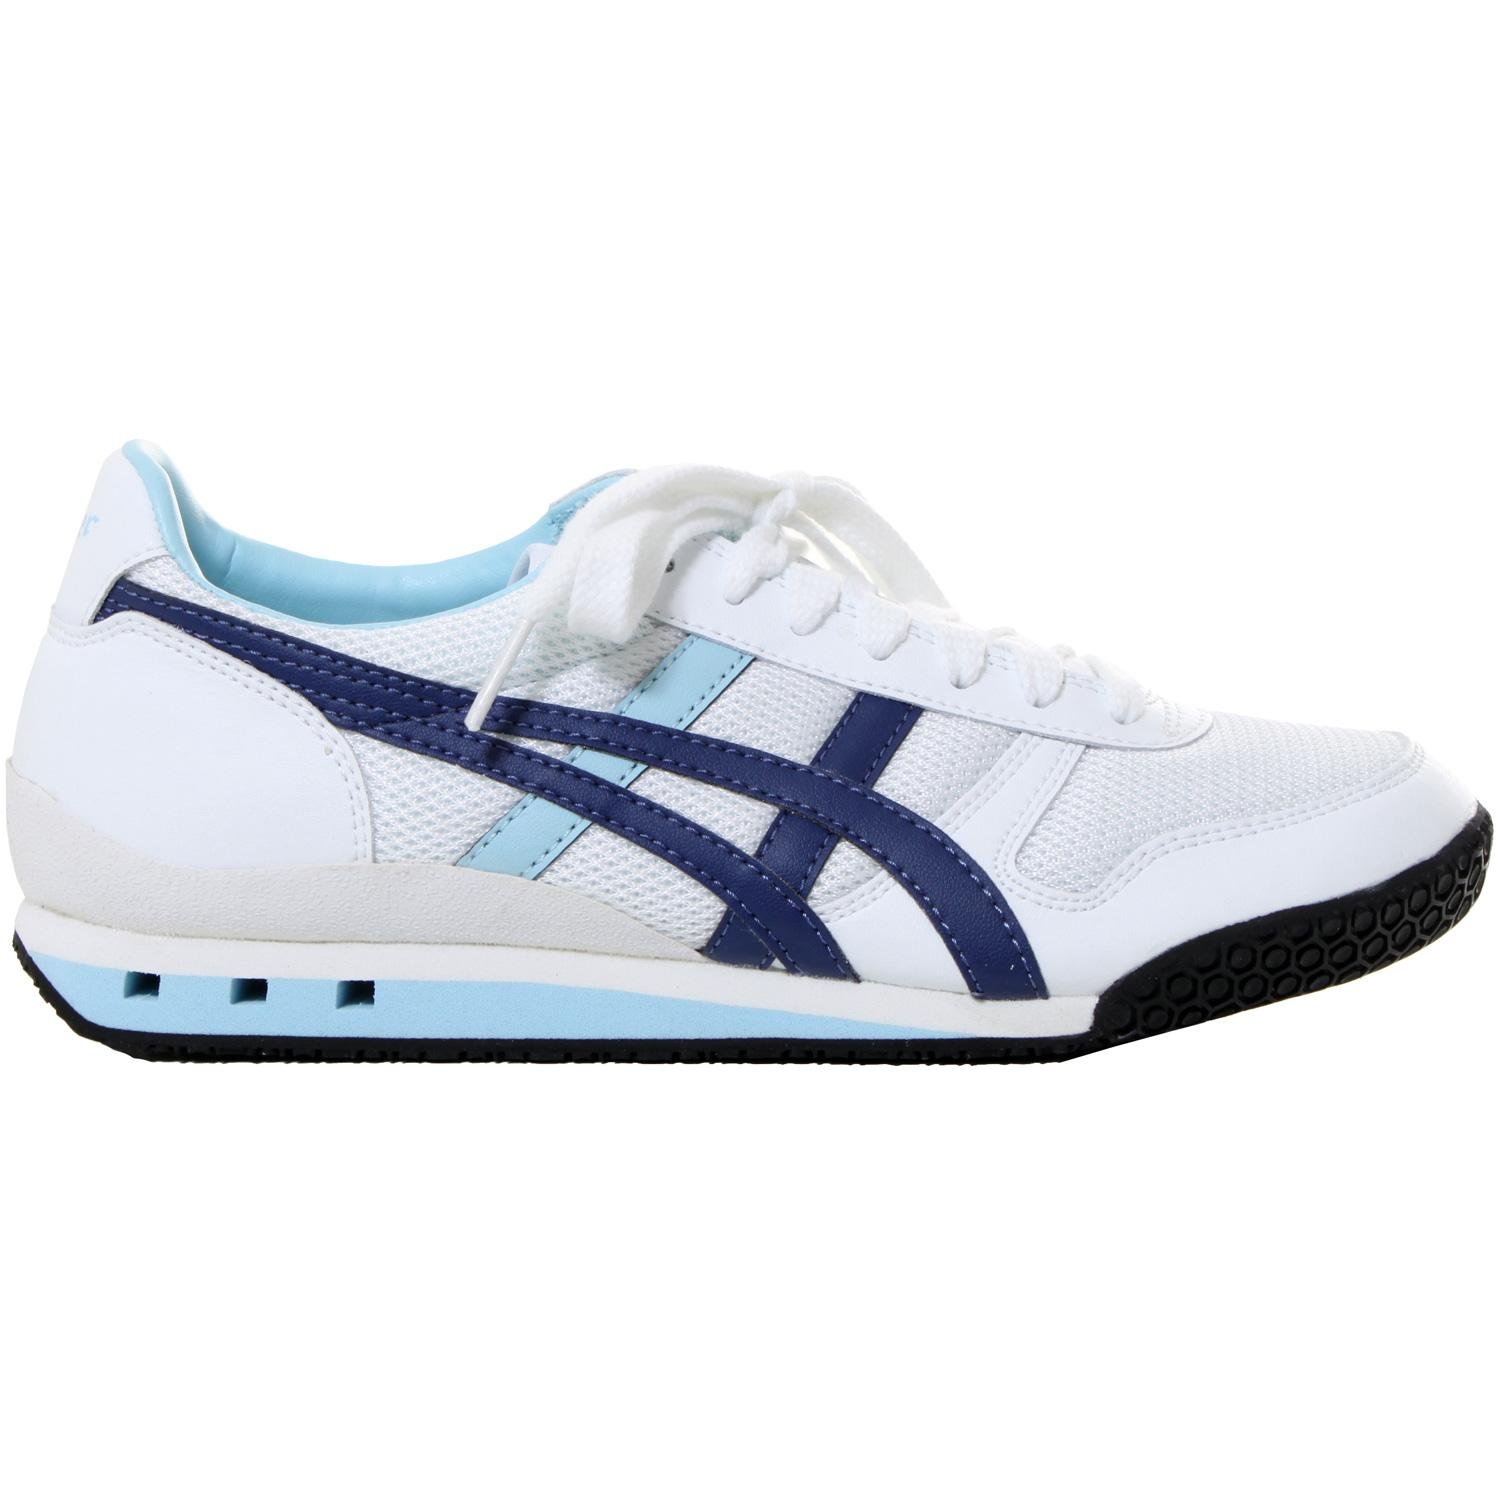 Onitsuka Tiger Ultimate 81 Shoes - Women's | evo outlet